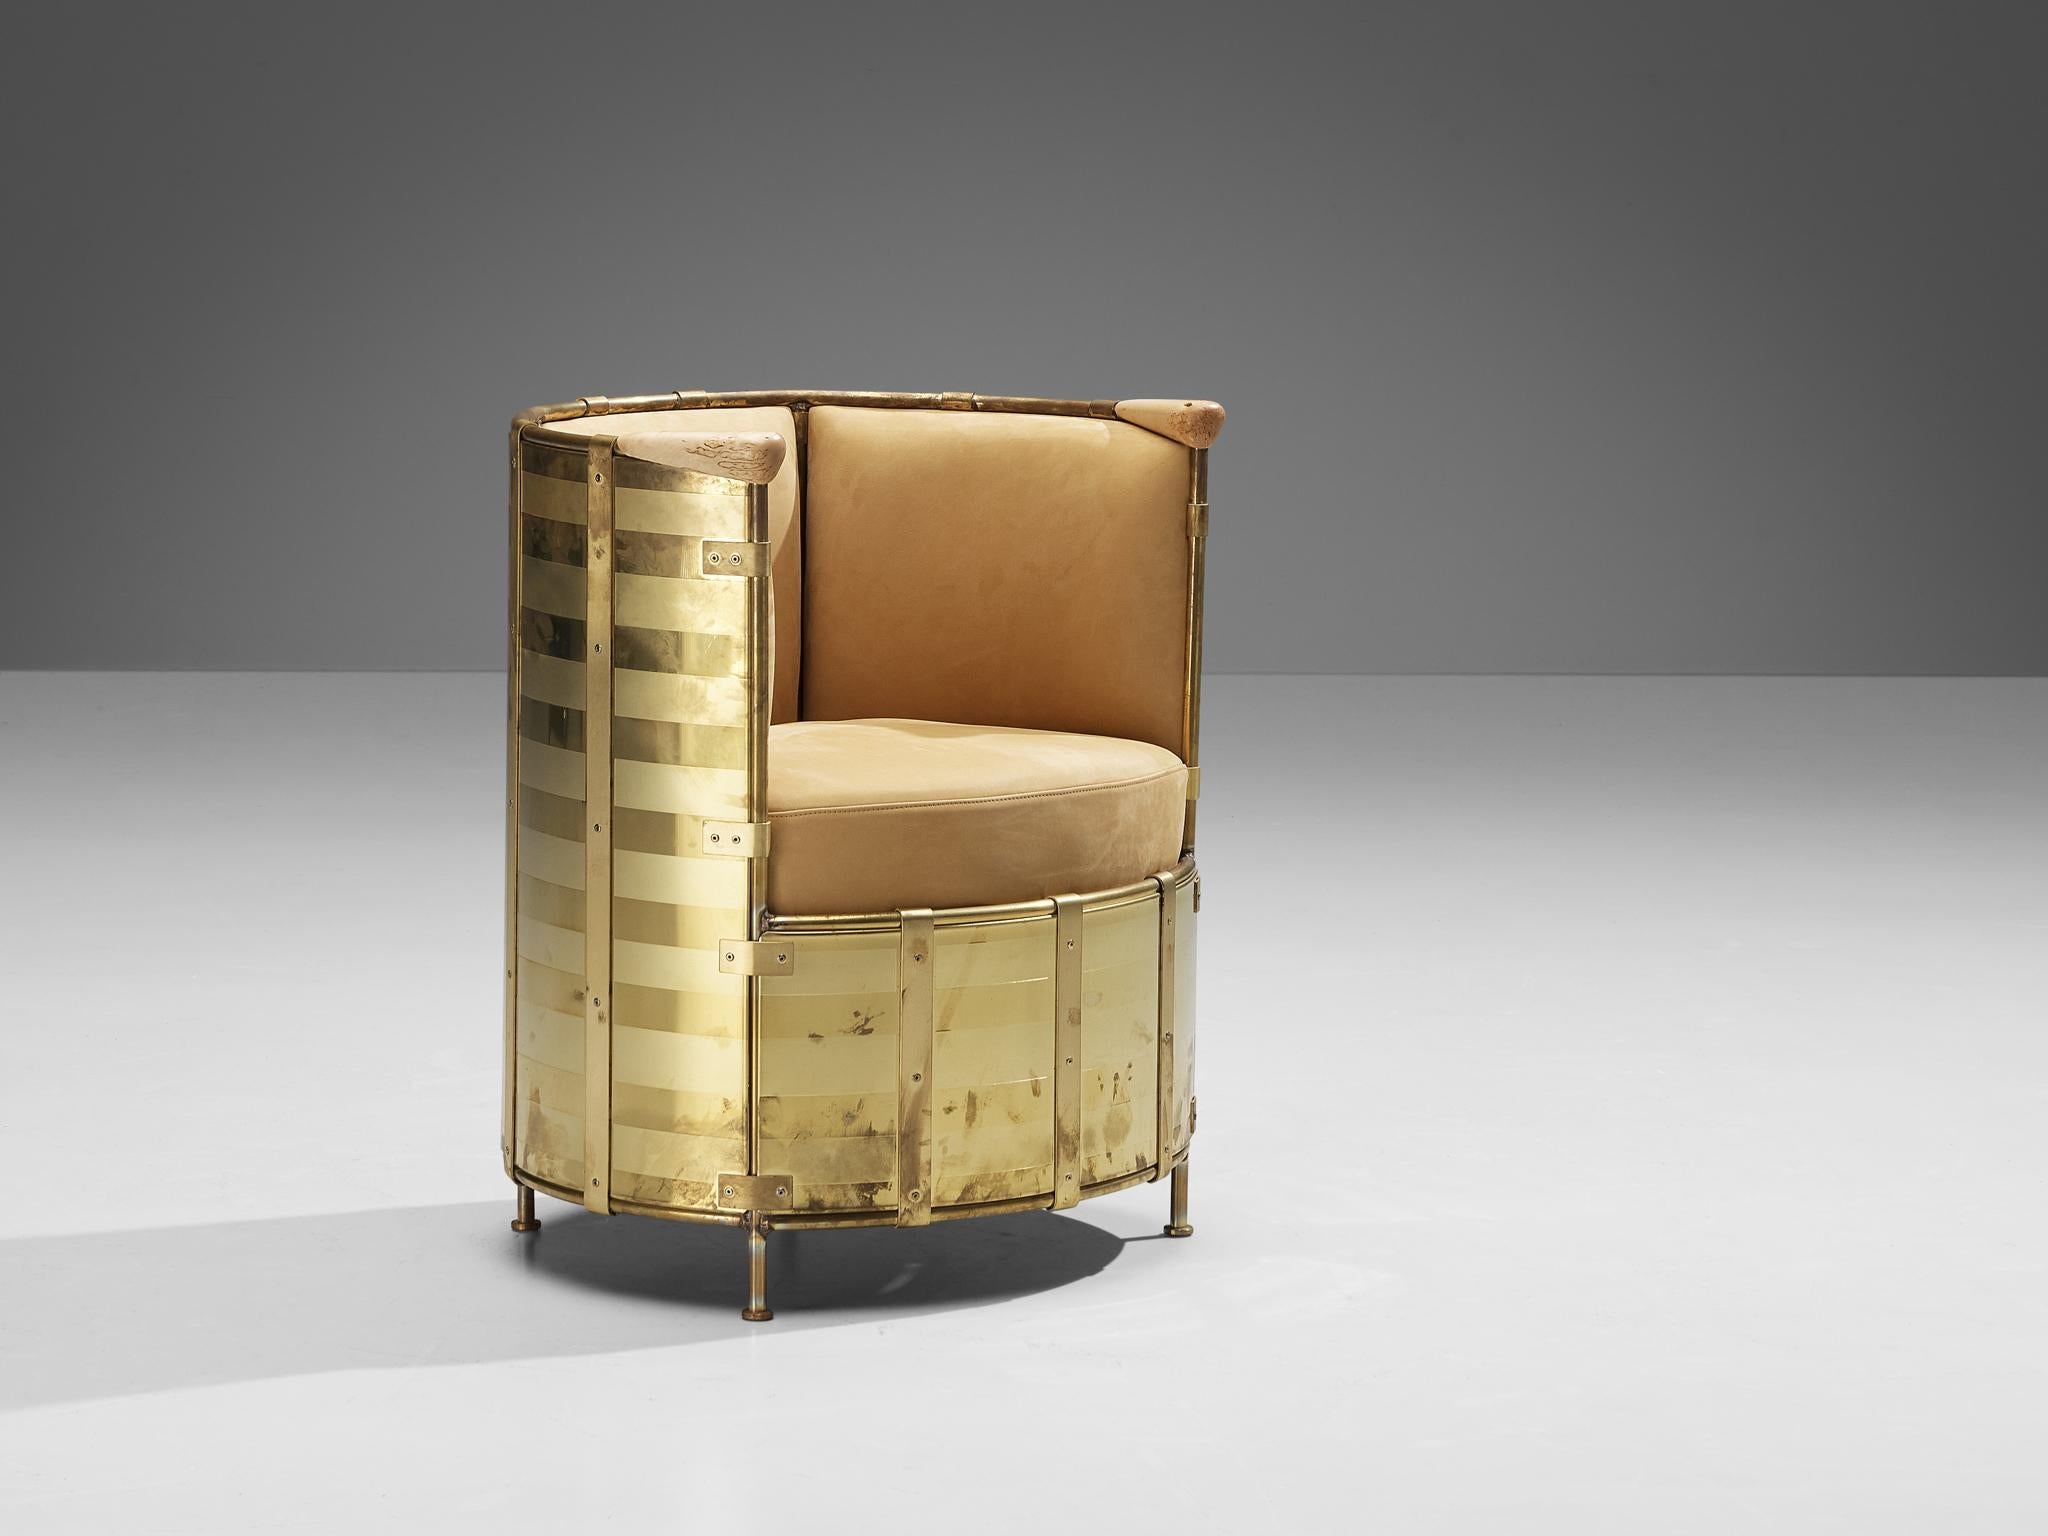 Mats Theselius for Källemo AB Limited Edition Lounge Chair 'El Dorado'